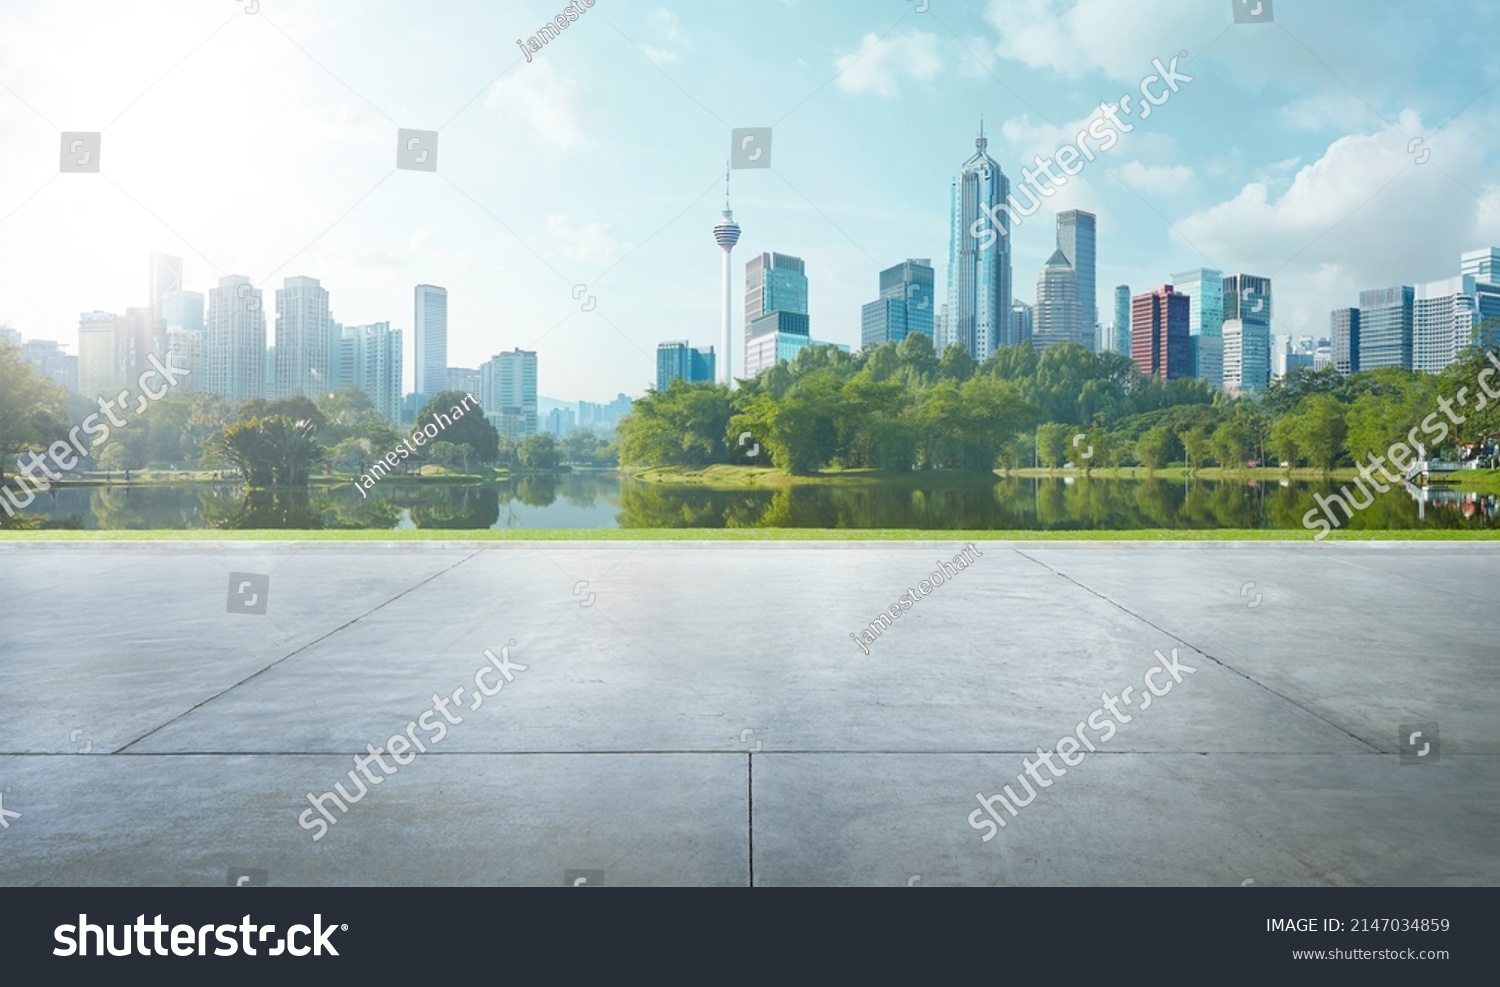 Empty cement floor with lake garden and modern city skyline in background. #2147034859